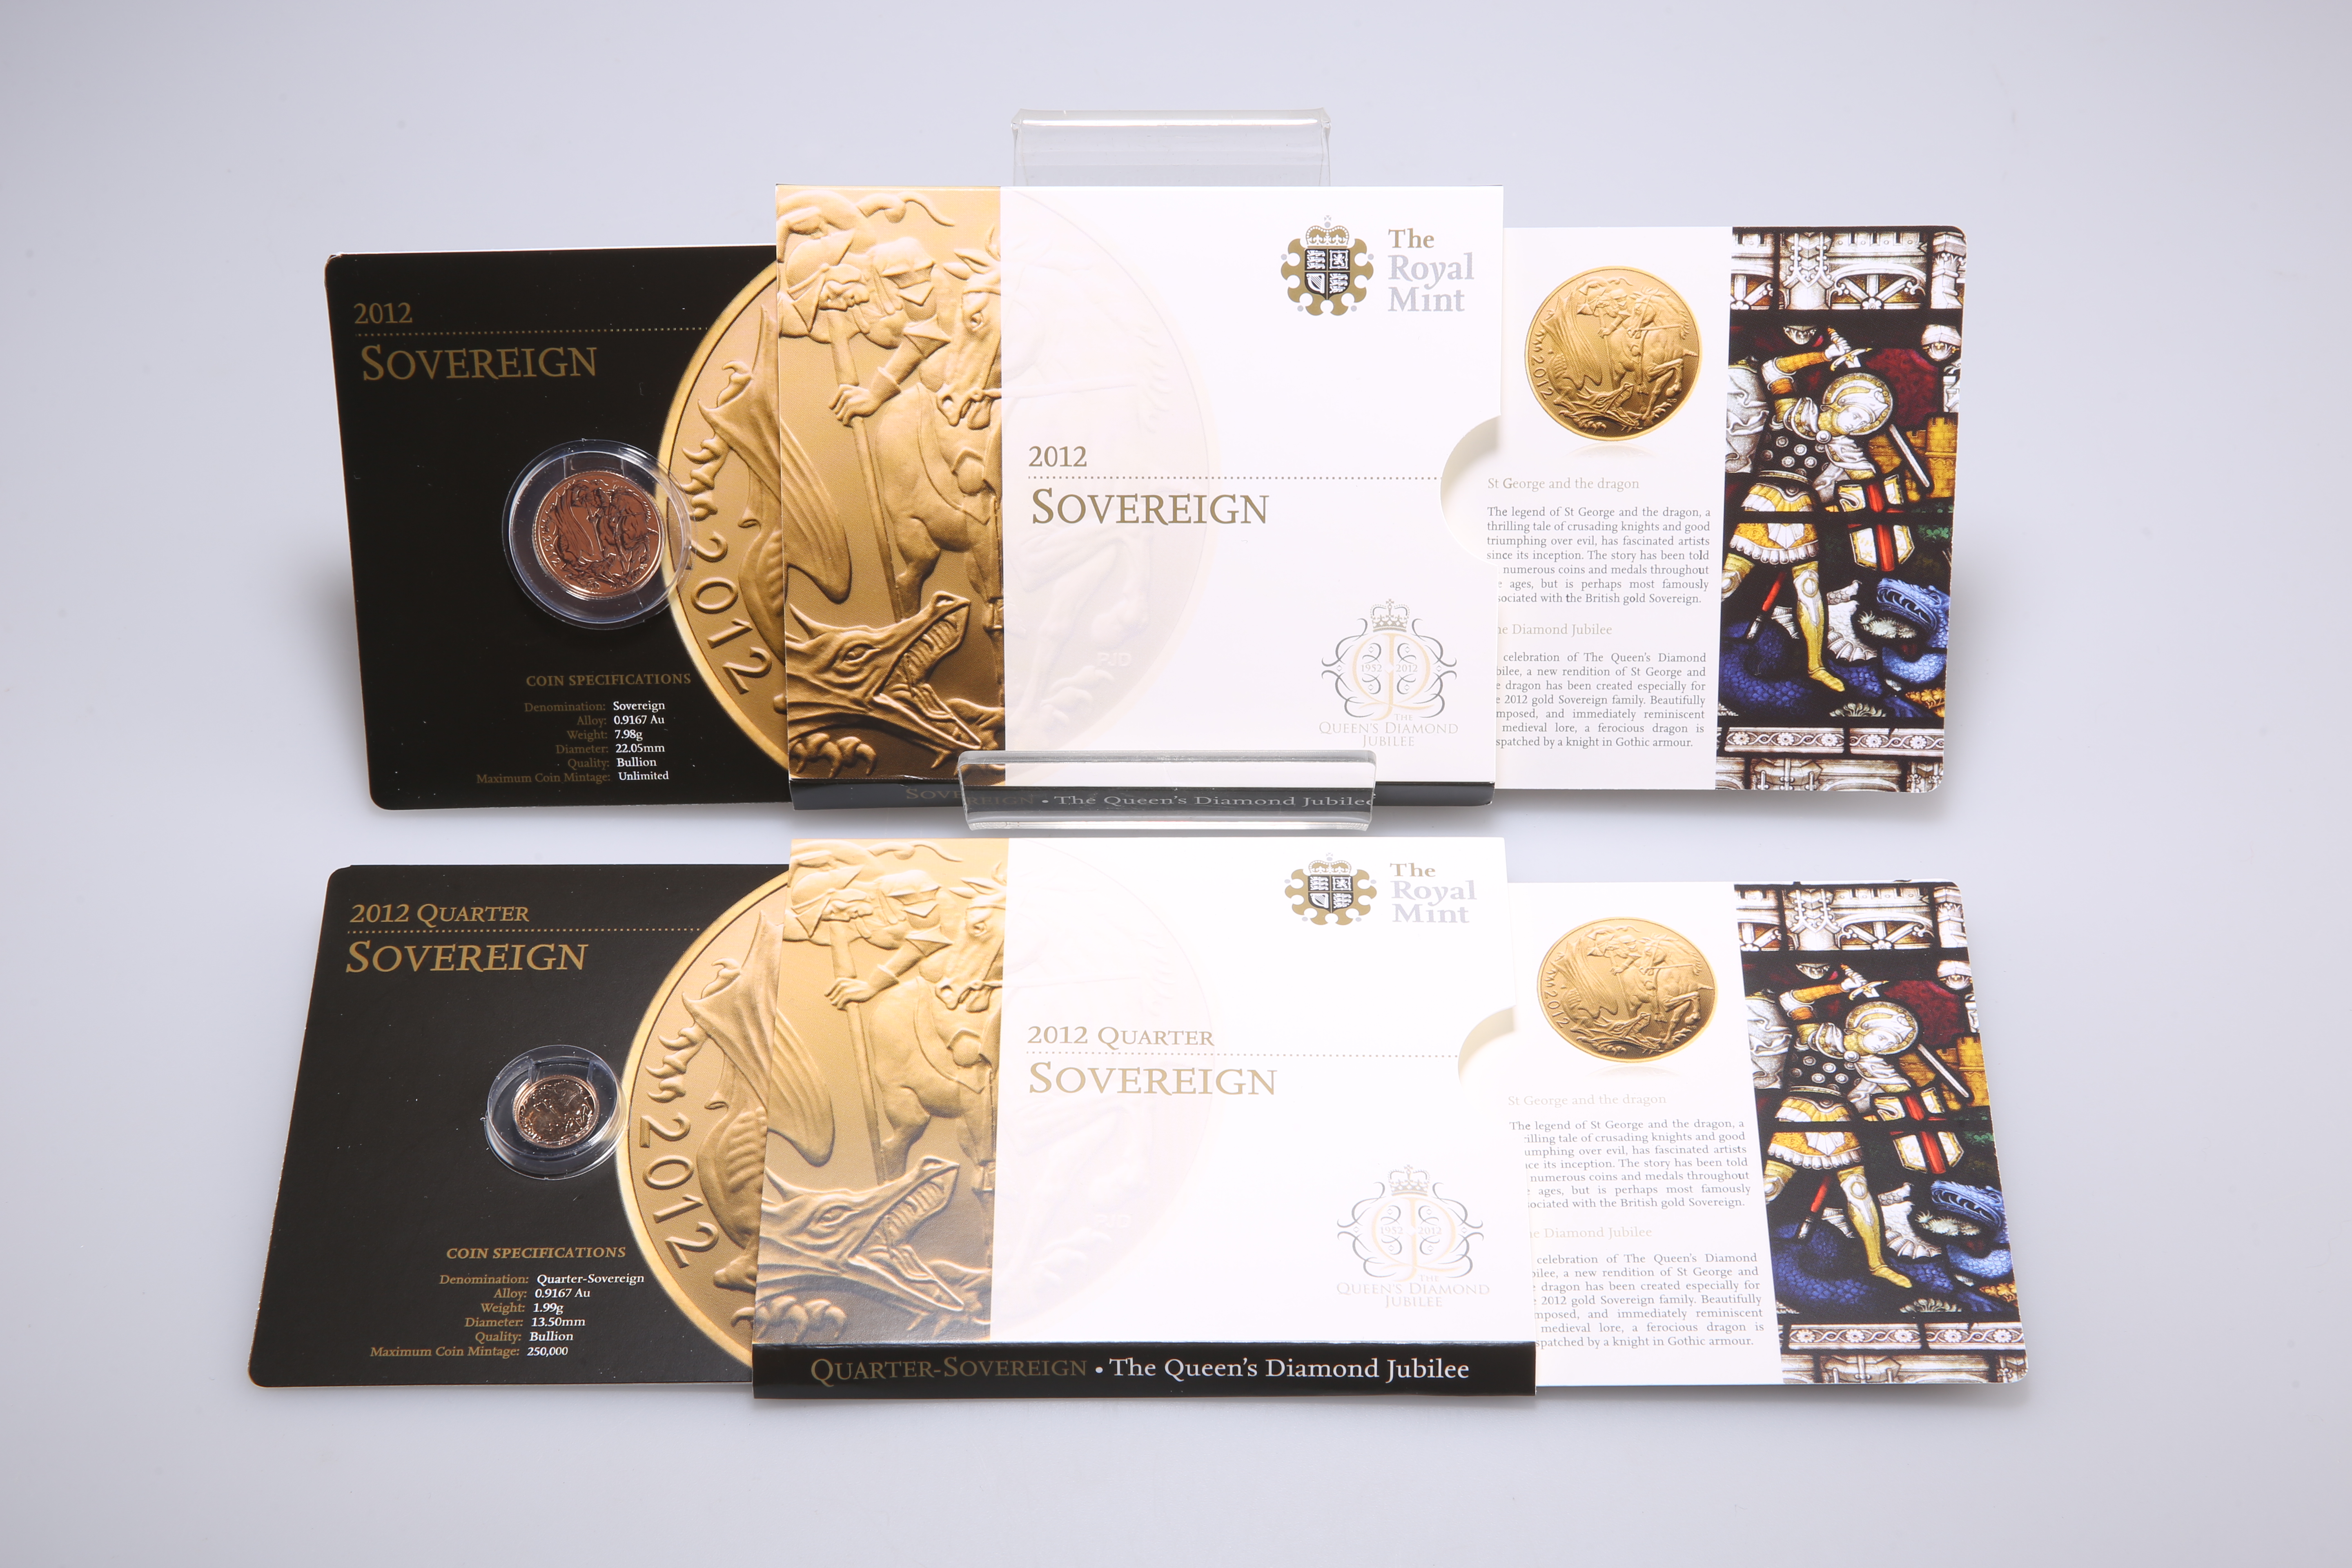 A ROYAL MINT 2012 FULL SOVEREIGN, "THE QUEEN'S DIAMOND JUBILEE"